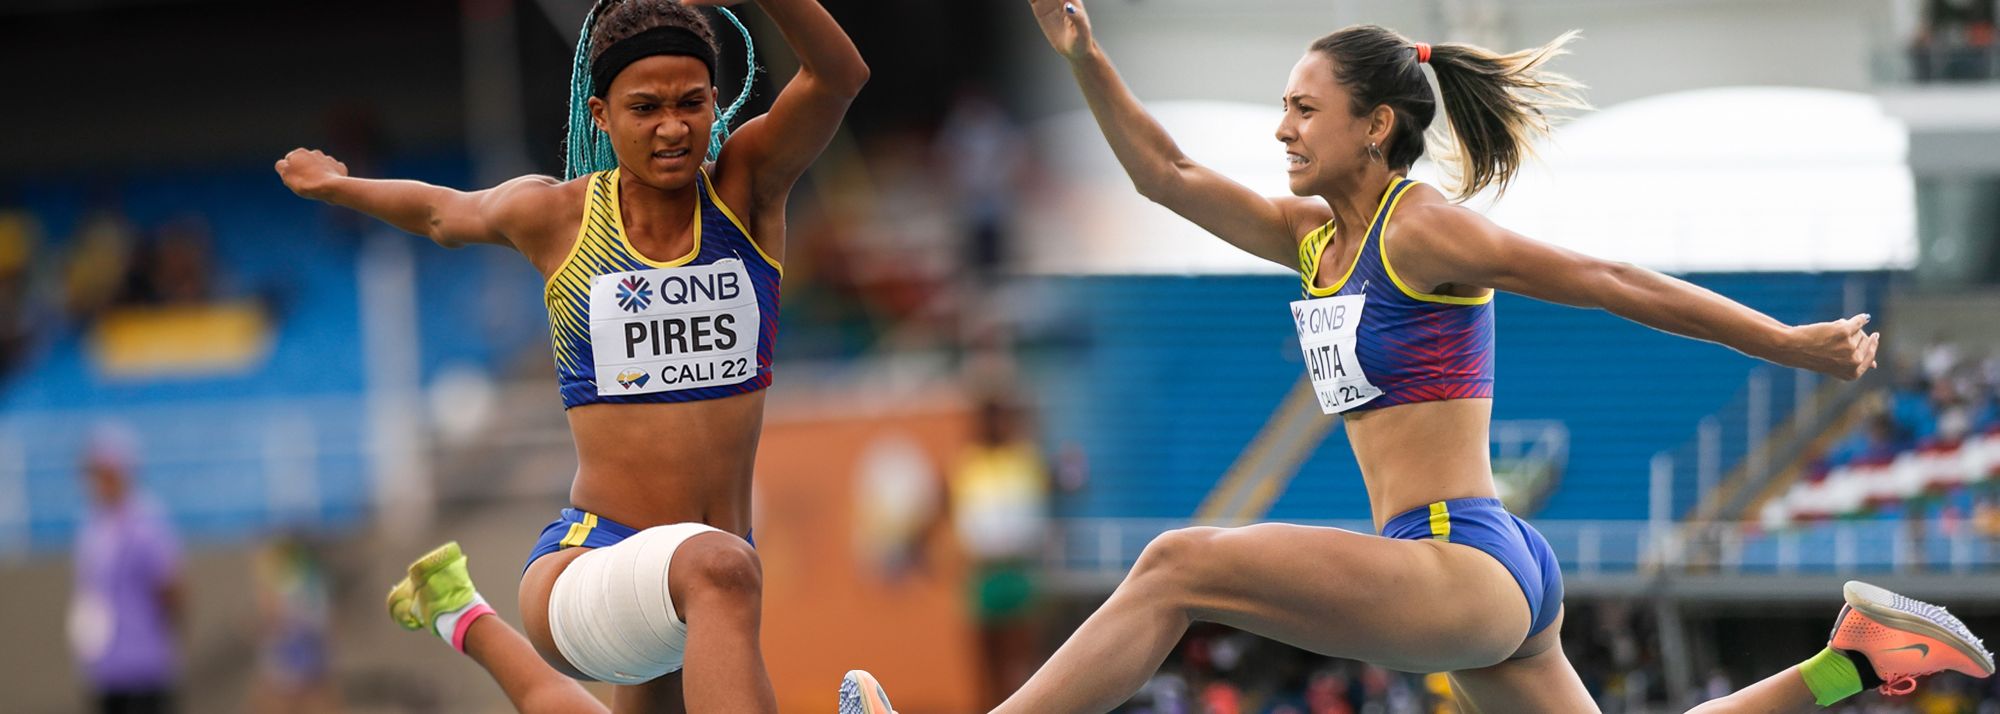 Fernanda Maita and Mairy Pires took another leap forward at the World Athletics U20 Championships Cali 22